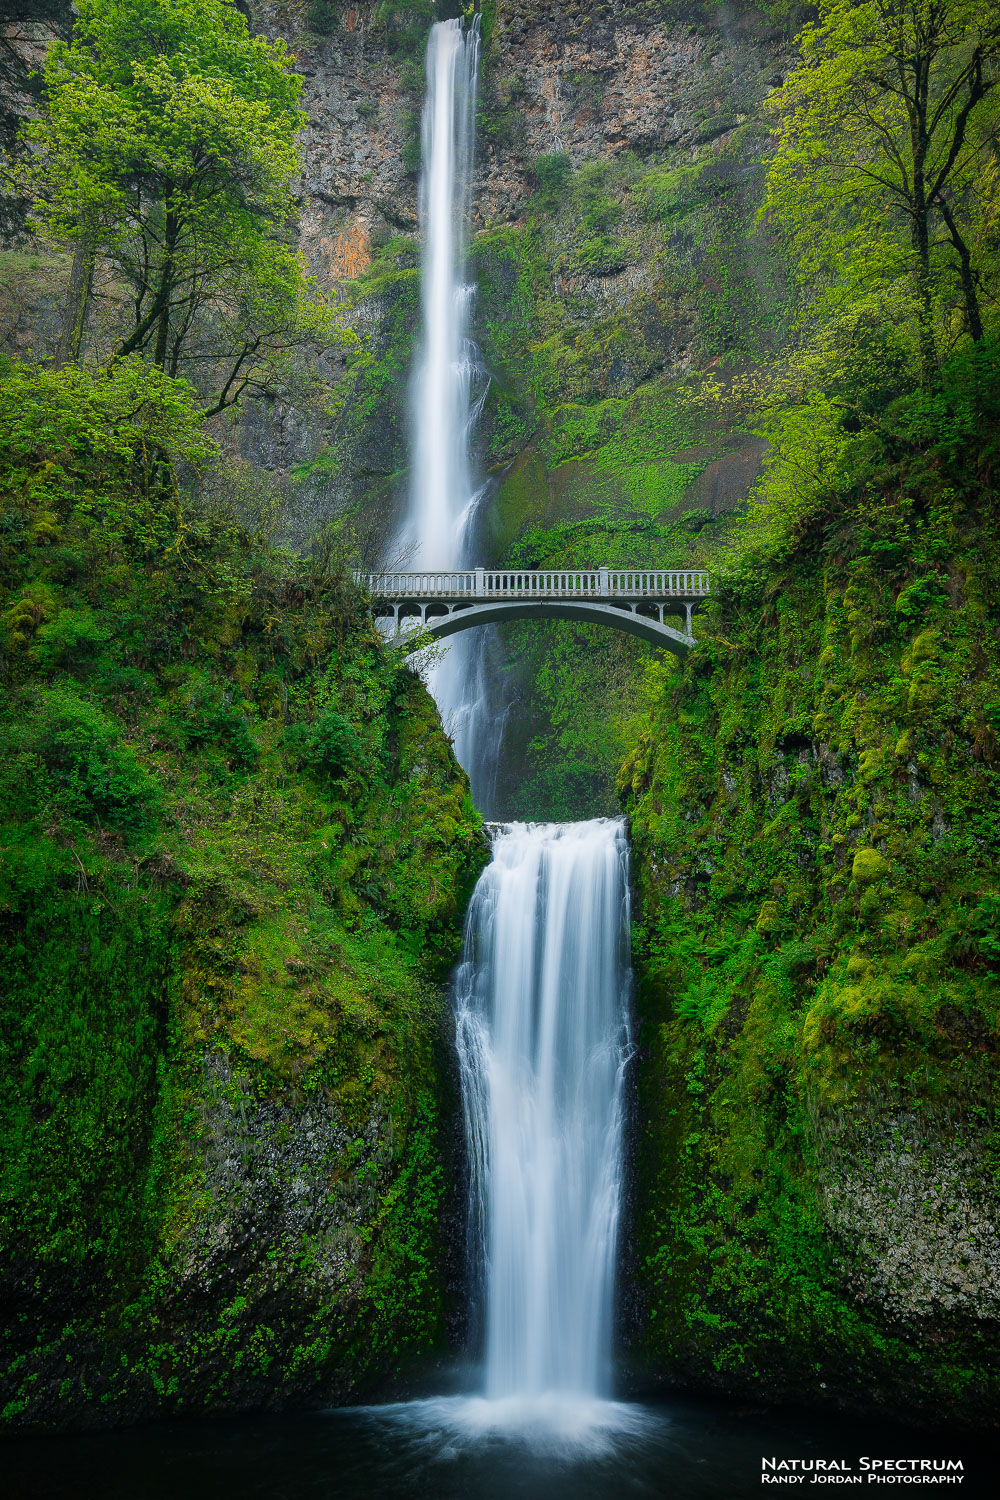 The majesty of Multnomah Falls is nearly impossible to describe and certainly a highlight of any adventure to the Columbia River...